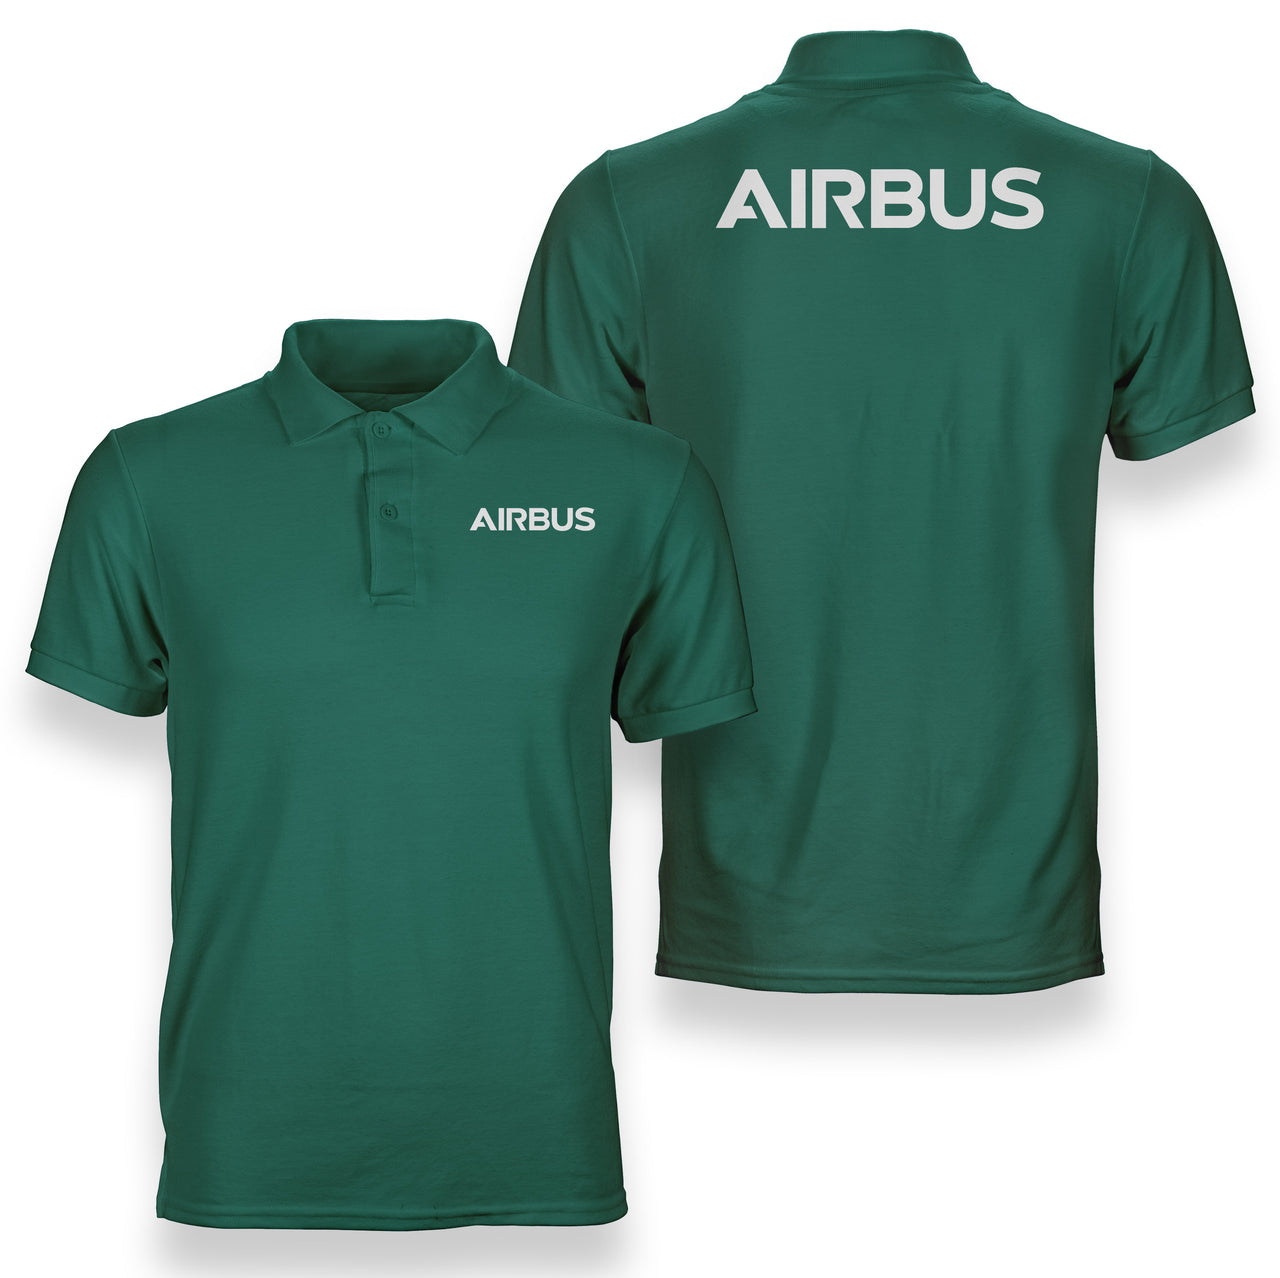 Airbus & Text Designed Double Side Polo T-Shirts